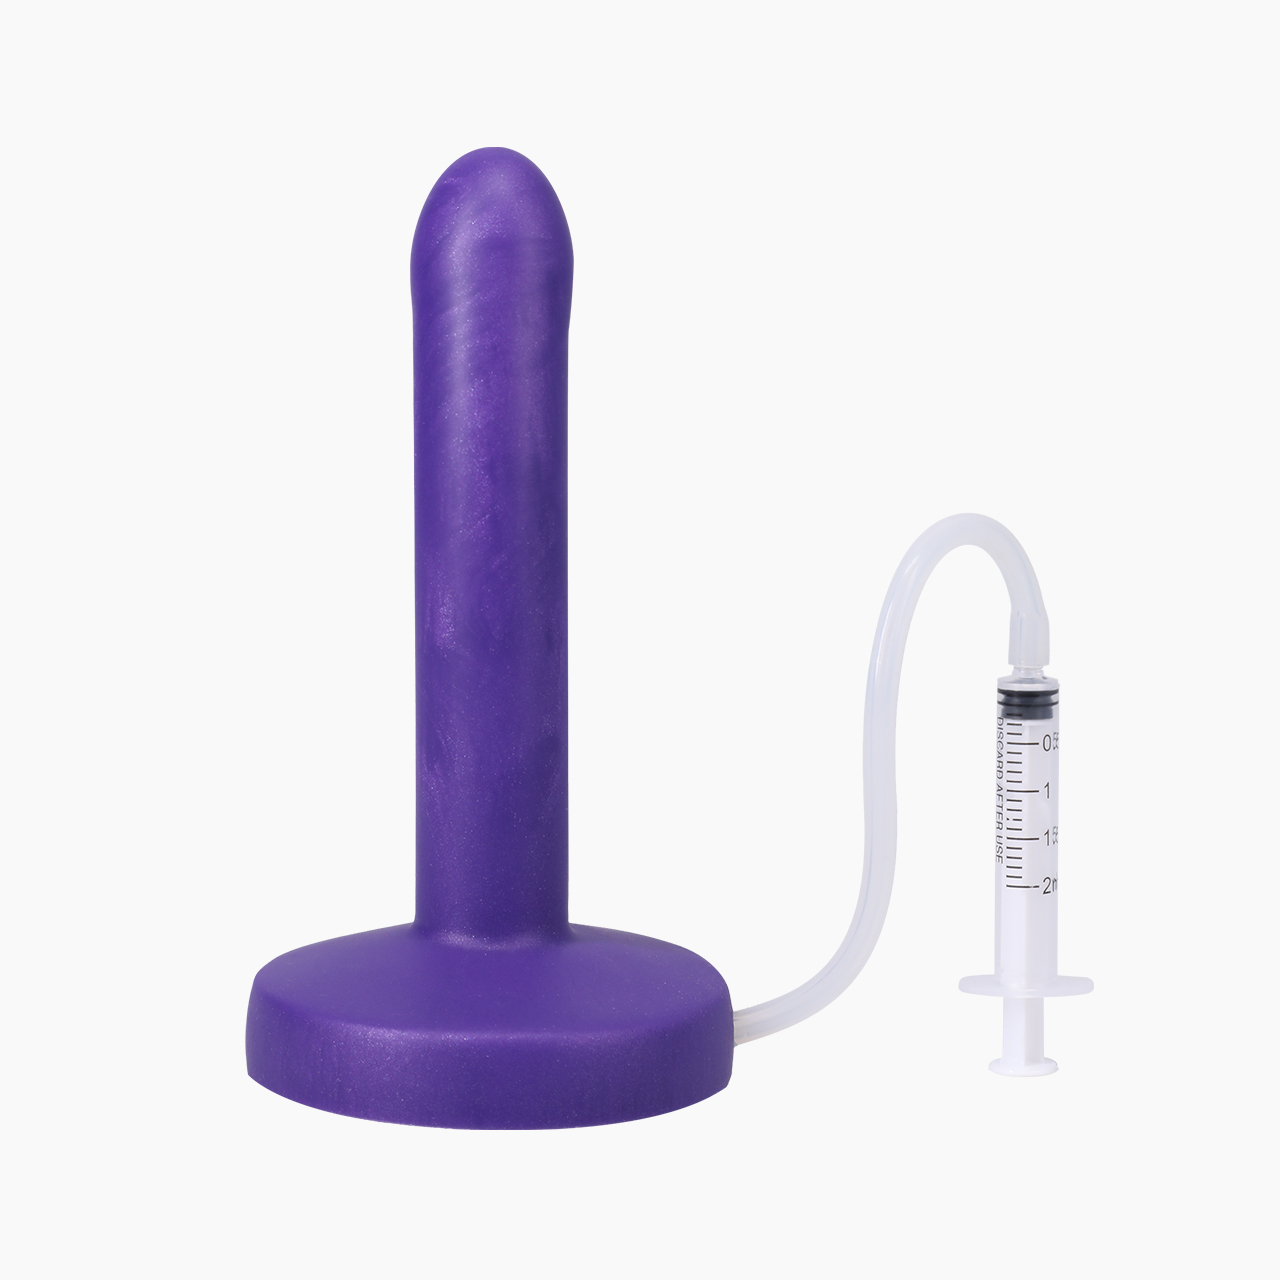 POP! Slim Squirting Dildo with ejaculation mechanism for artificial insemination